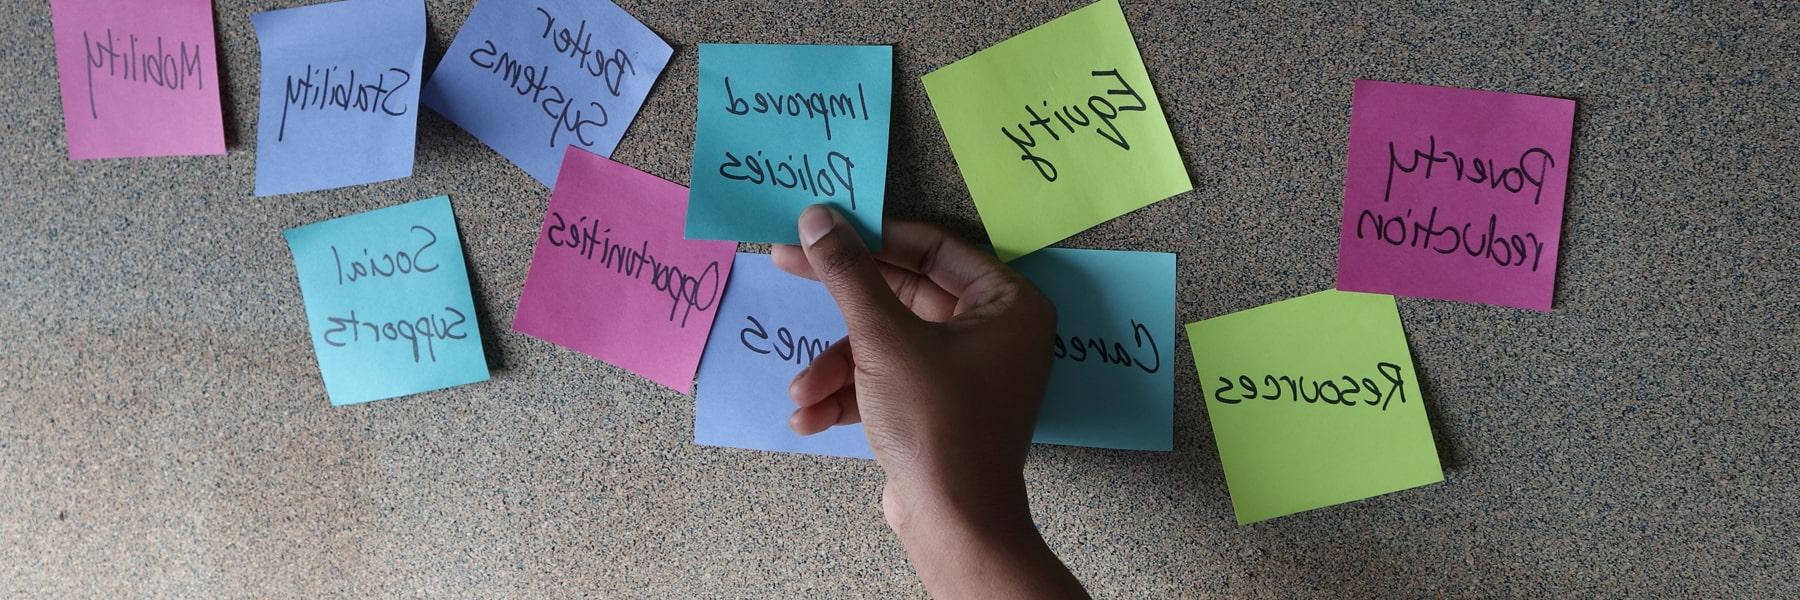 persons hand posting sticky notes on a board that read equity related words like 'poverty reduction,' 'opportunities,' 'social supports'